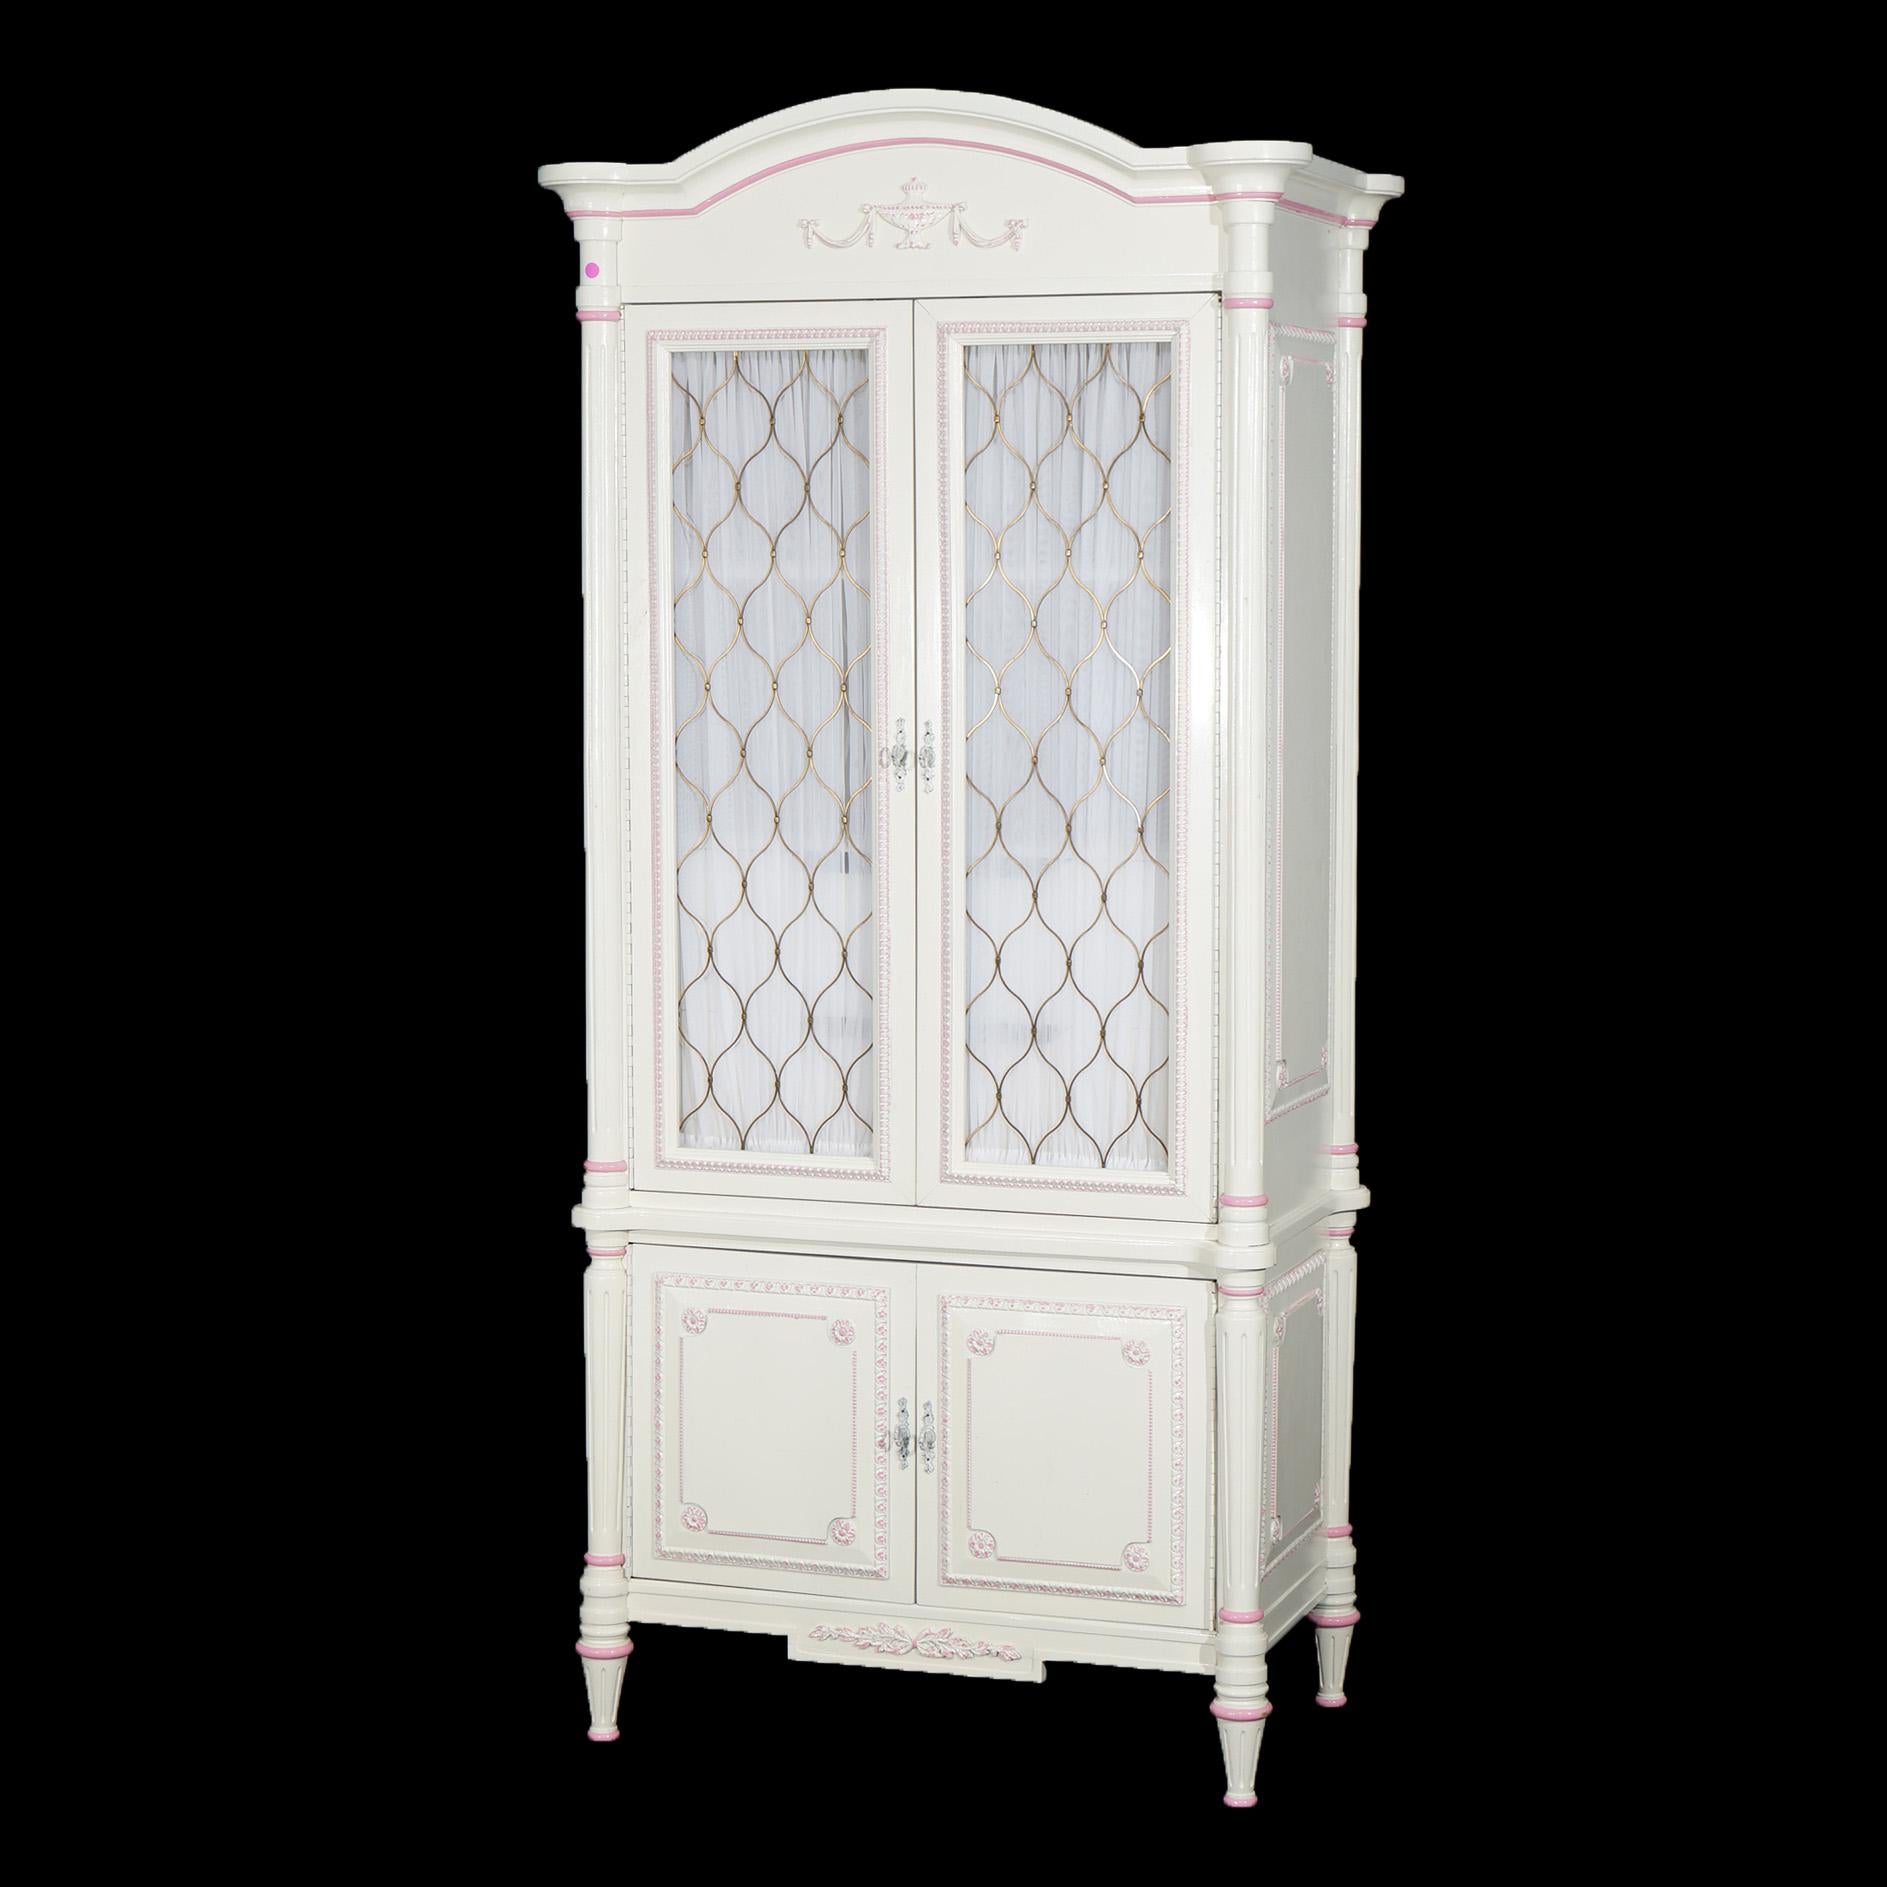 ***Ask About Reduced In-House Shipping Rates - Reliable Service & Fully Insured***
A French Provincial wardrobe offers painted wood construction having rose accents with double doors having curtains and metal lattice facing and opening to interior